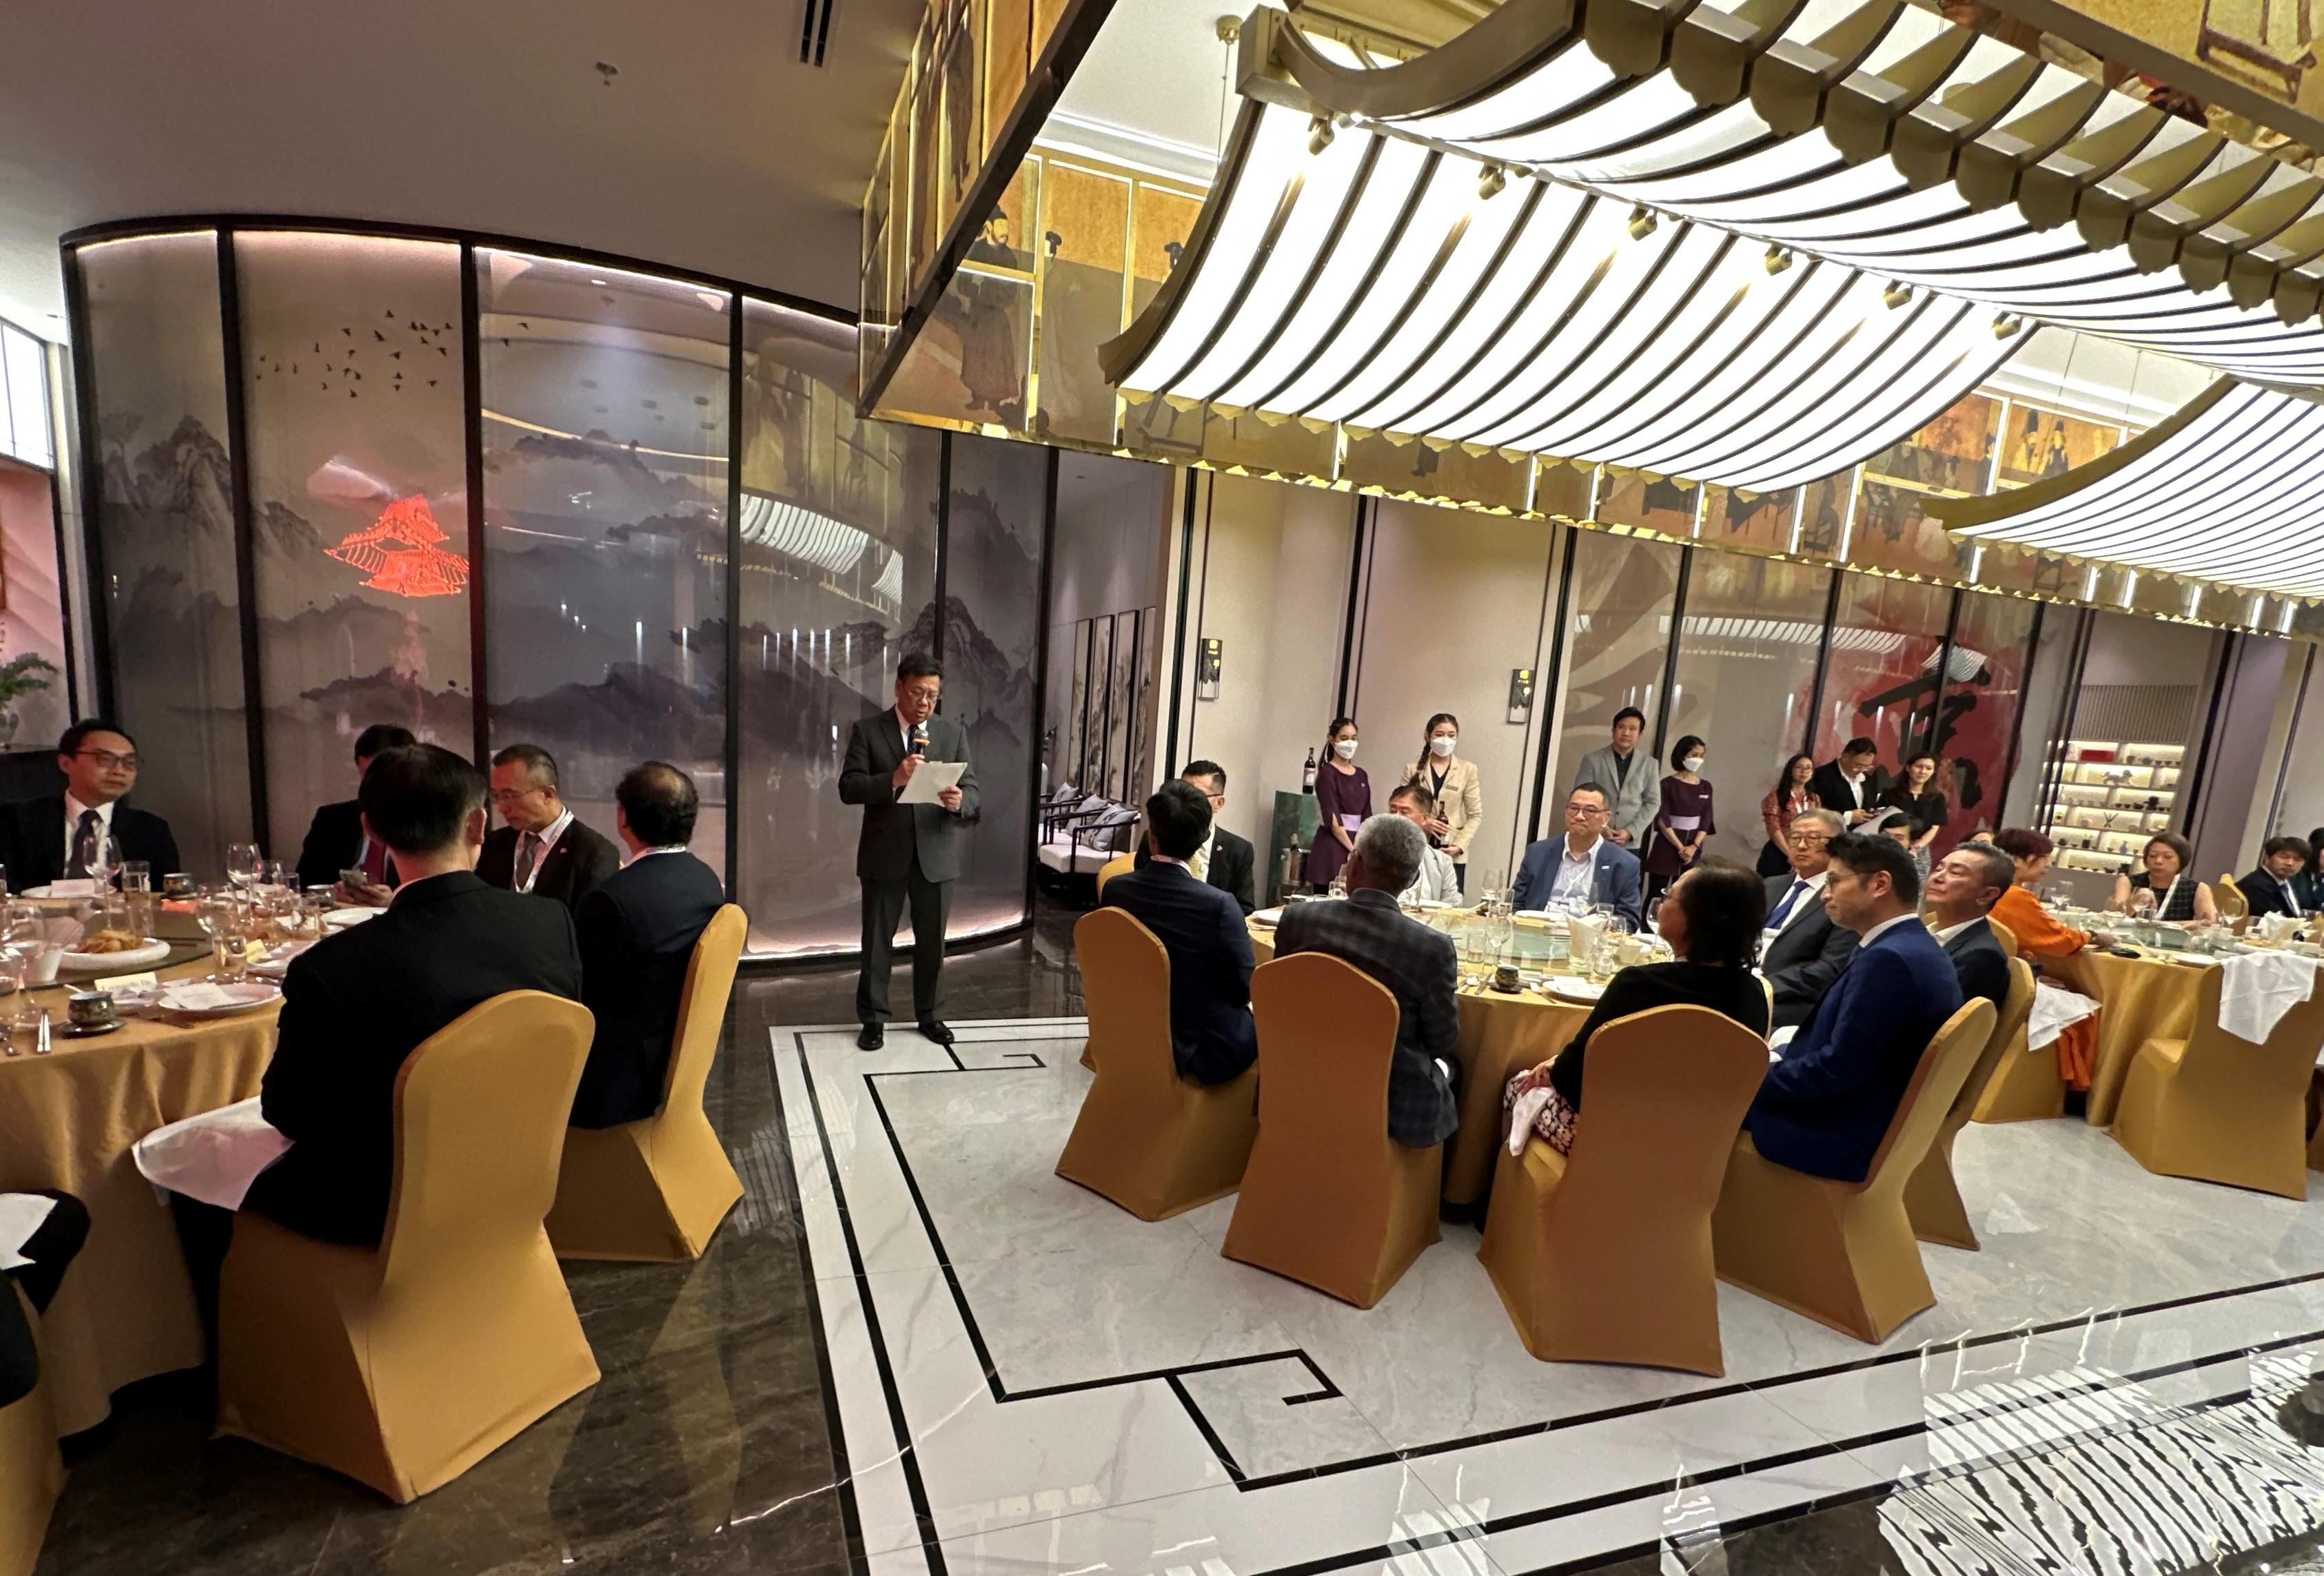 The Secretary for Commerce and Economic Development, Mr Algernon Yau, hosted dinner for some 60 representatives from the Federation of Hong Kong Business Associations Worldwide in Bangkok, Thailand, today (July 13) to exchange views on enhancing trade and business co-operation.